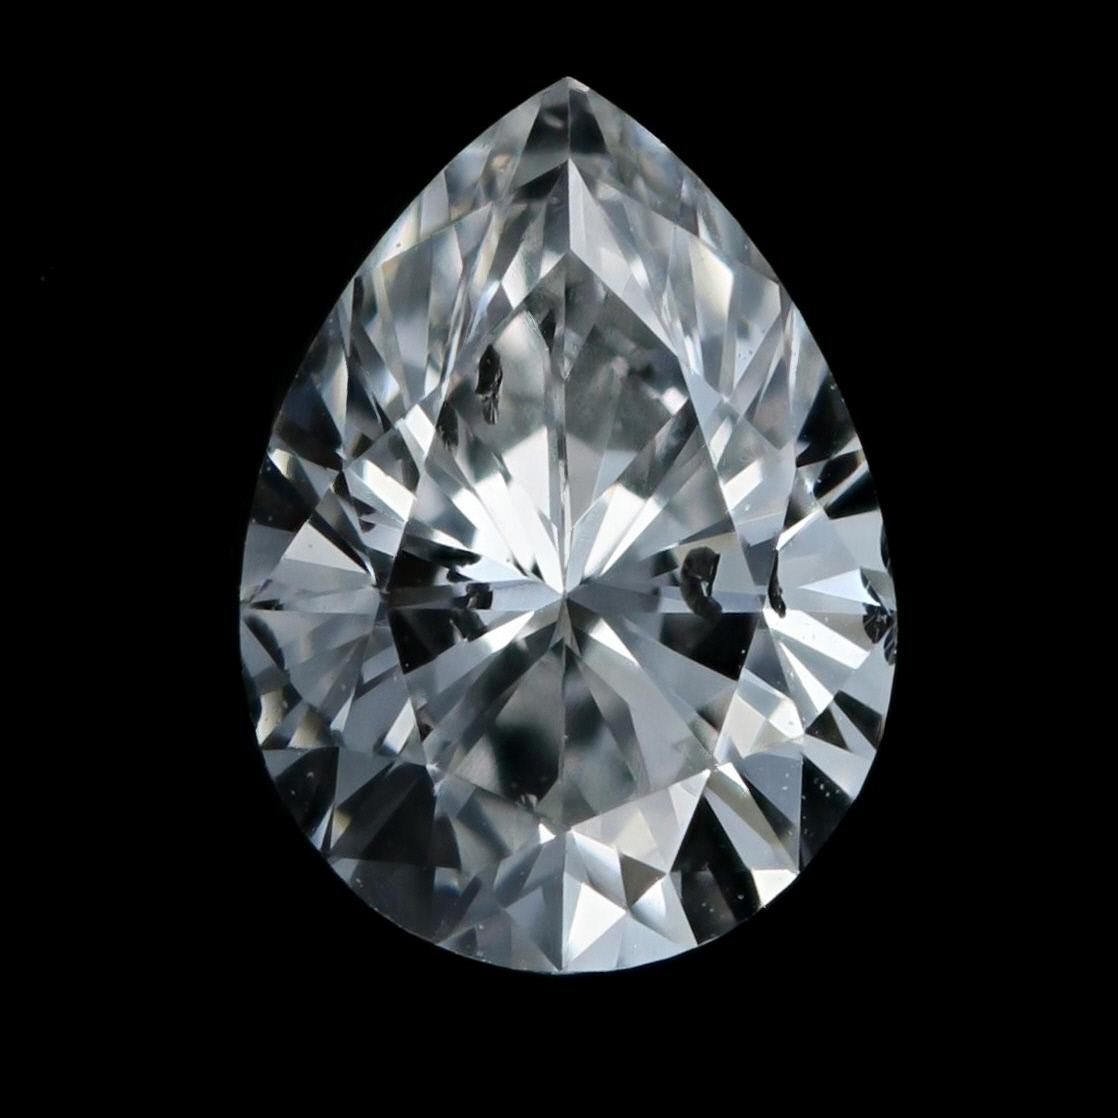 Weight: .45ct
Cut: Pear 
Color: G   
Clarity: I1 
Dimensions (mm): 6.13 x 4.49 x 2.83 

GIA Report Number: 5201725829 

Condition: New  

Please check out the enlarged pictures.

Thank you for taking the time to read our description. If you have any